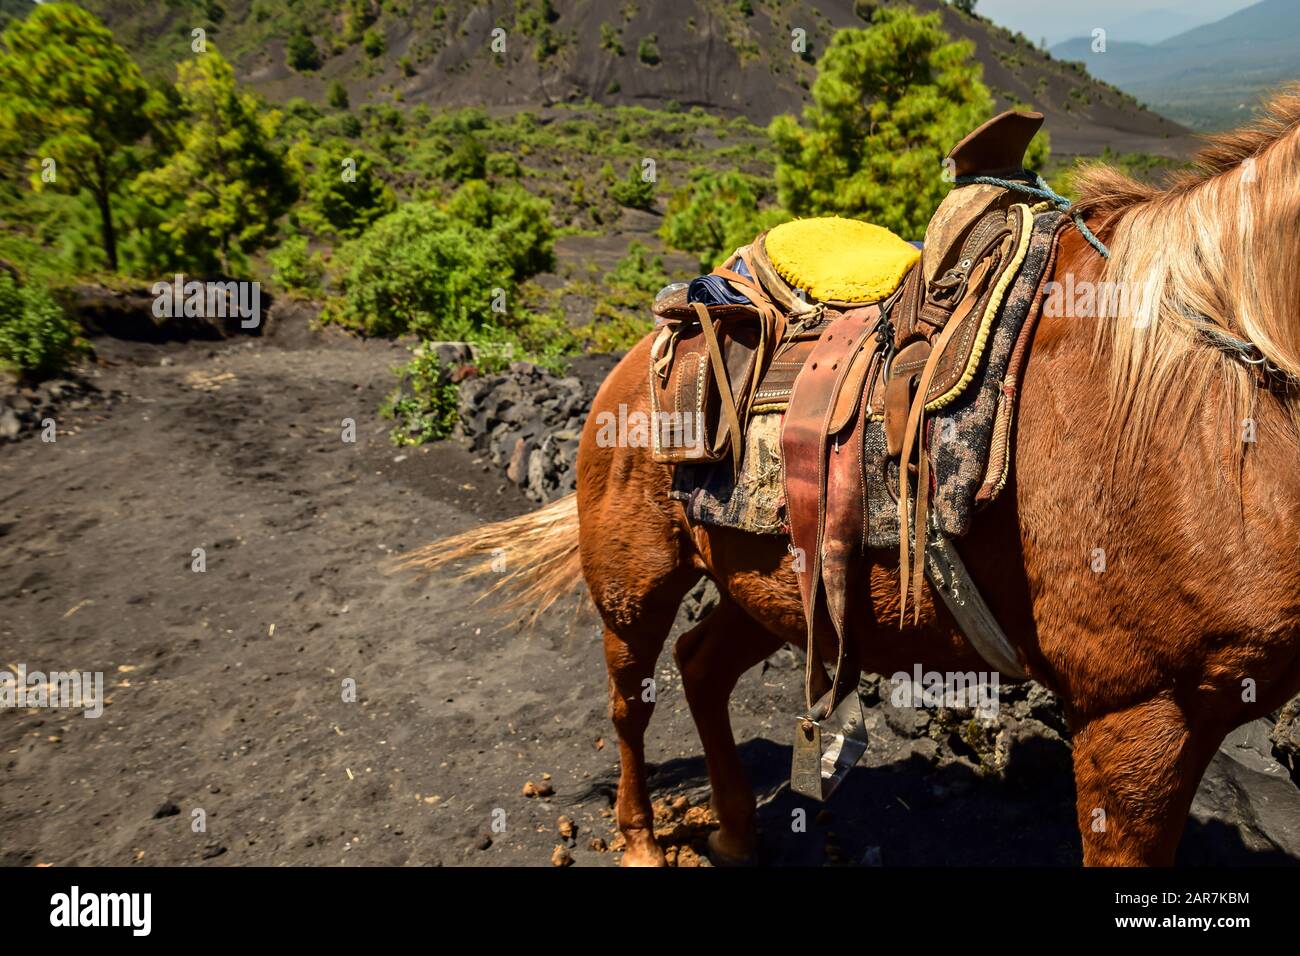 Horse with a saddle standing on an ash path leading up to a volcano, Paricutin, Mexico Stock Photo